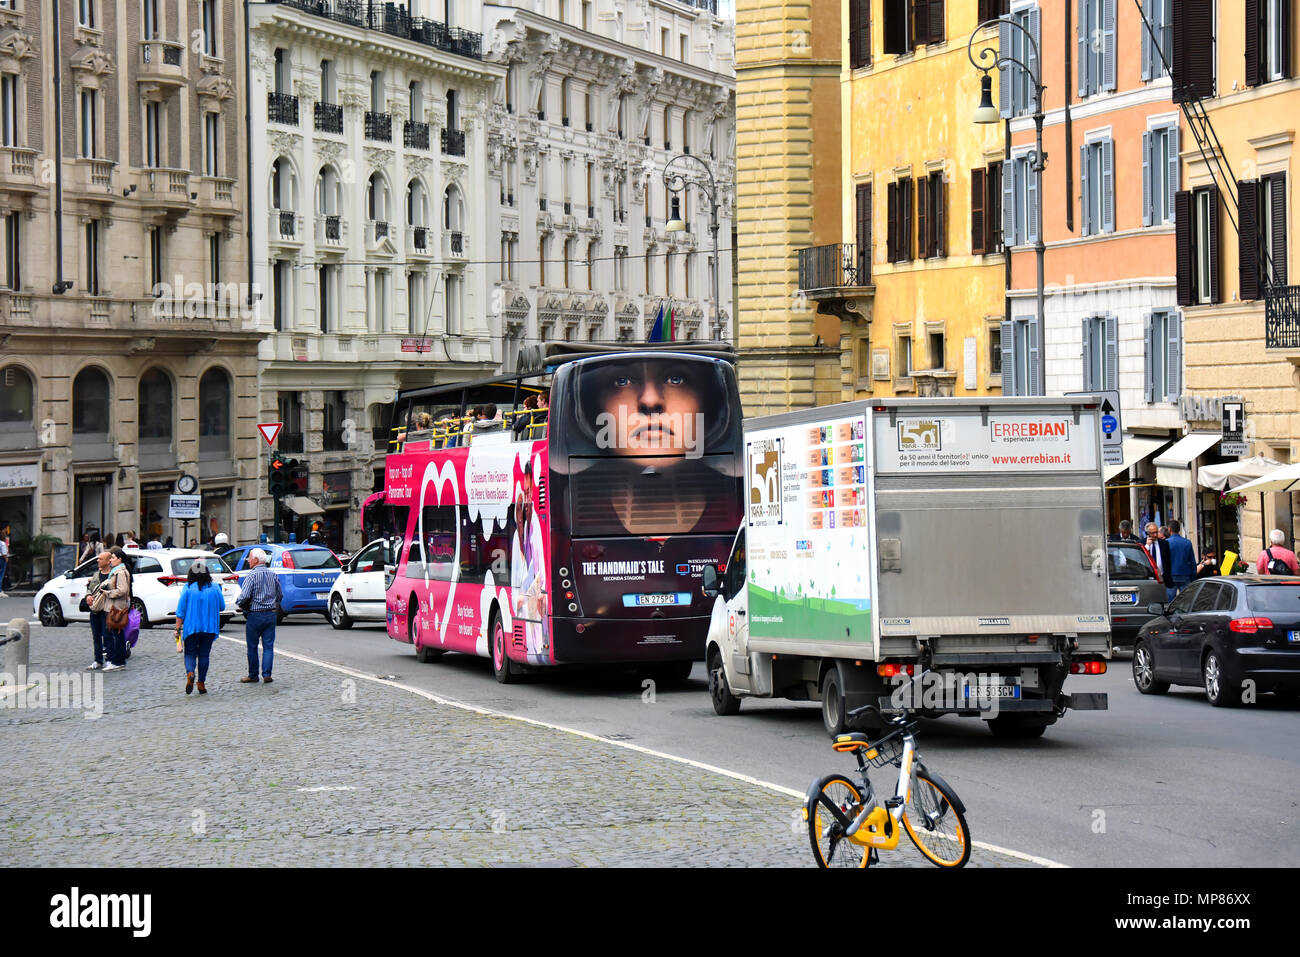 Rome, Italy - May 9, 2018: a sightseeing bus with an advertisement for The Handmaid’s tale drives tourists through the streets of the eternal city. Stock Photo